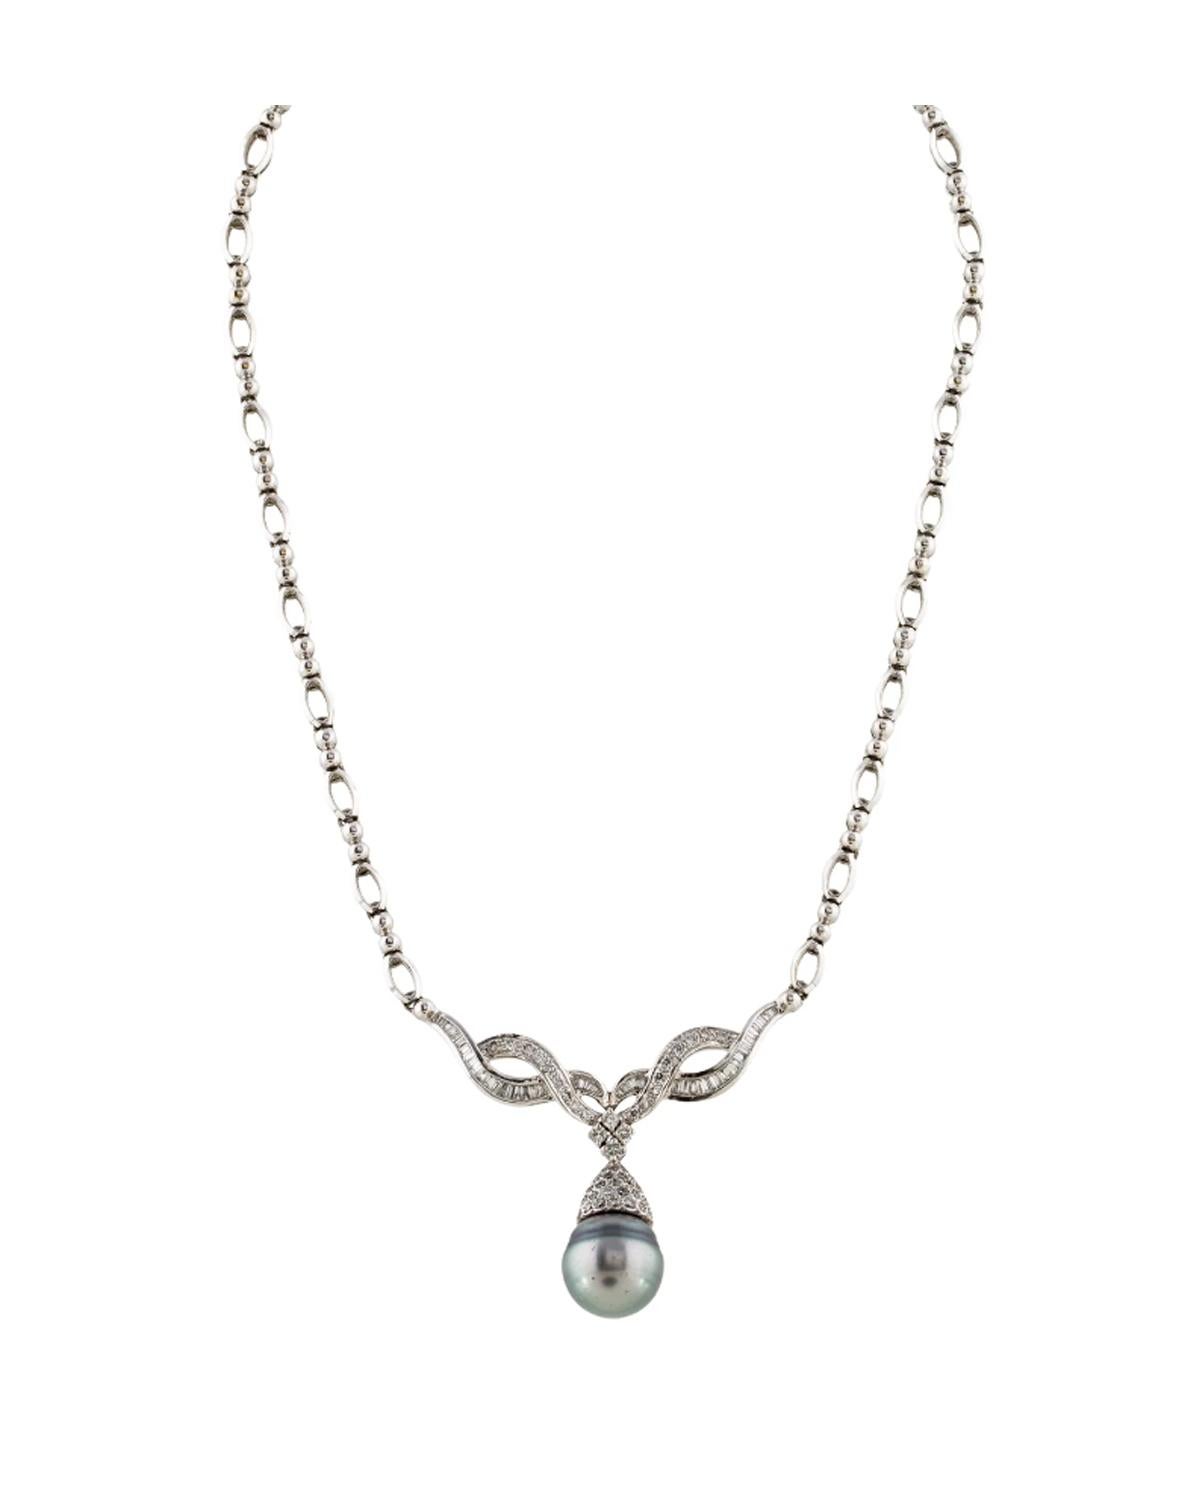 Brilliant Cut Diana M. 18 kt white gold diamond and pearl necklace featuring a center 14.00mm For Sale